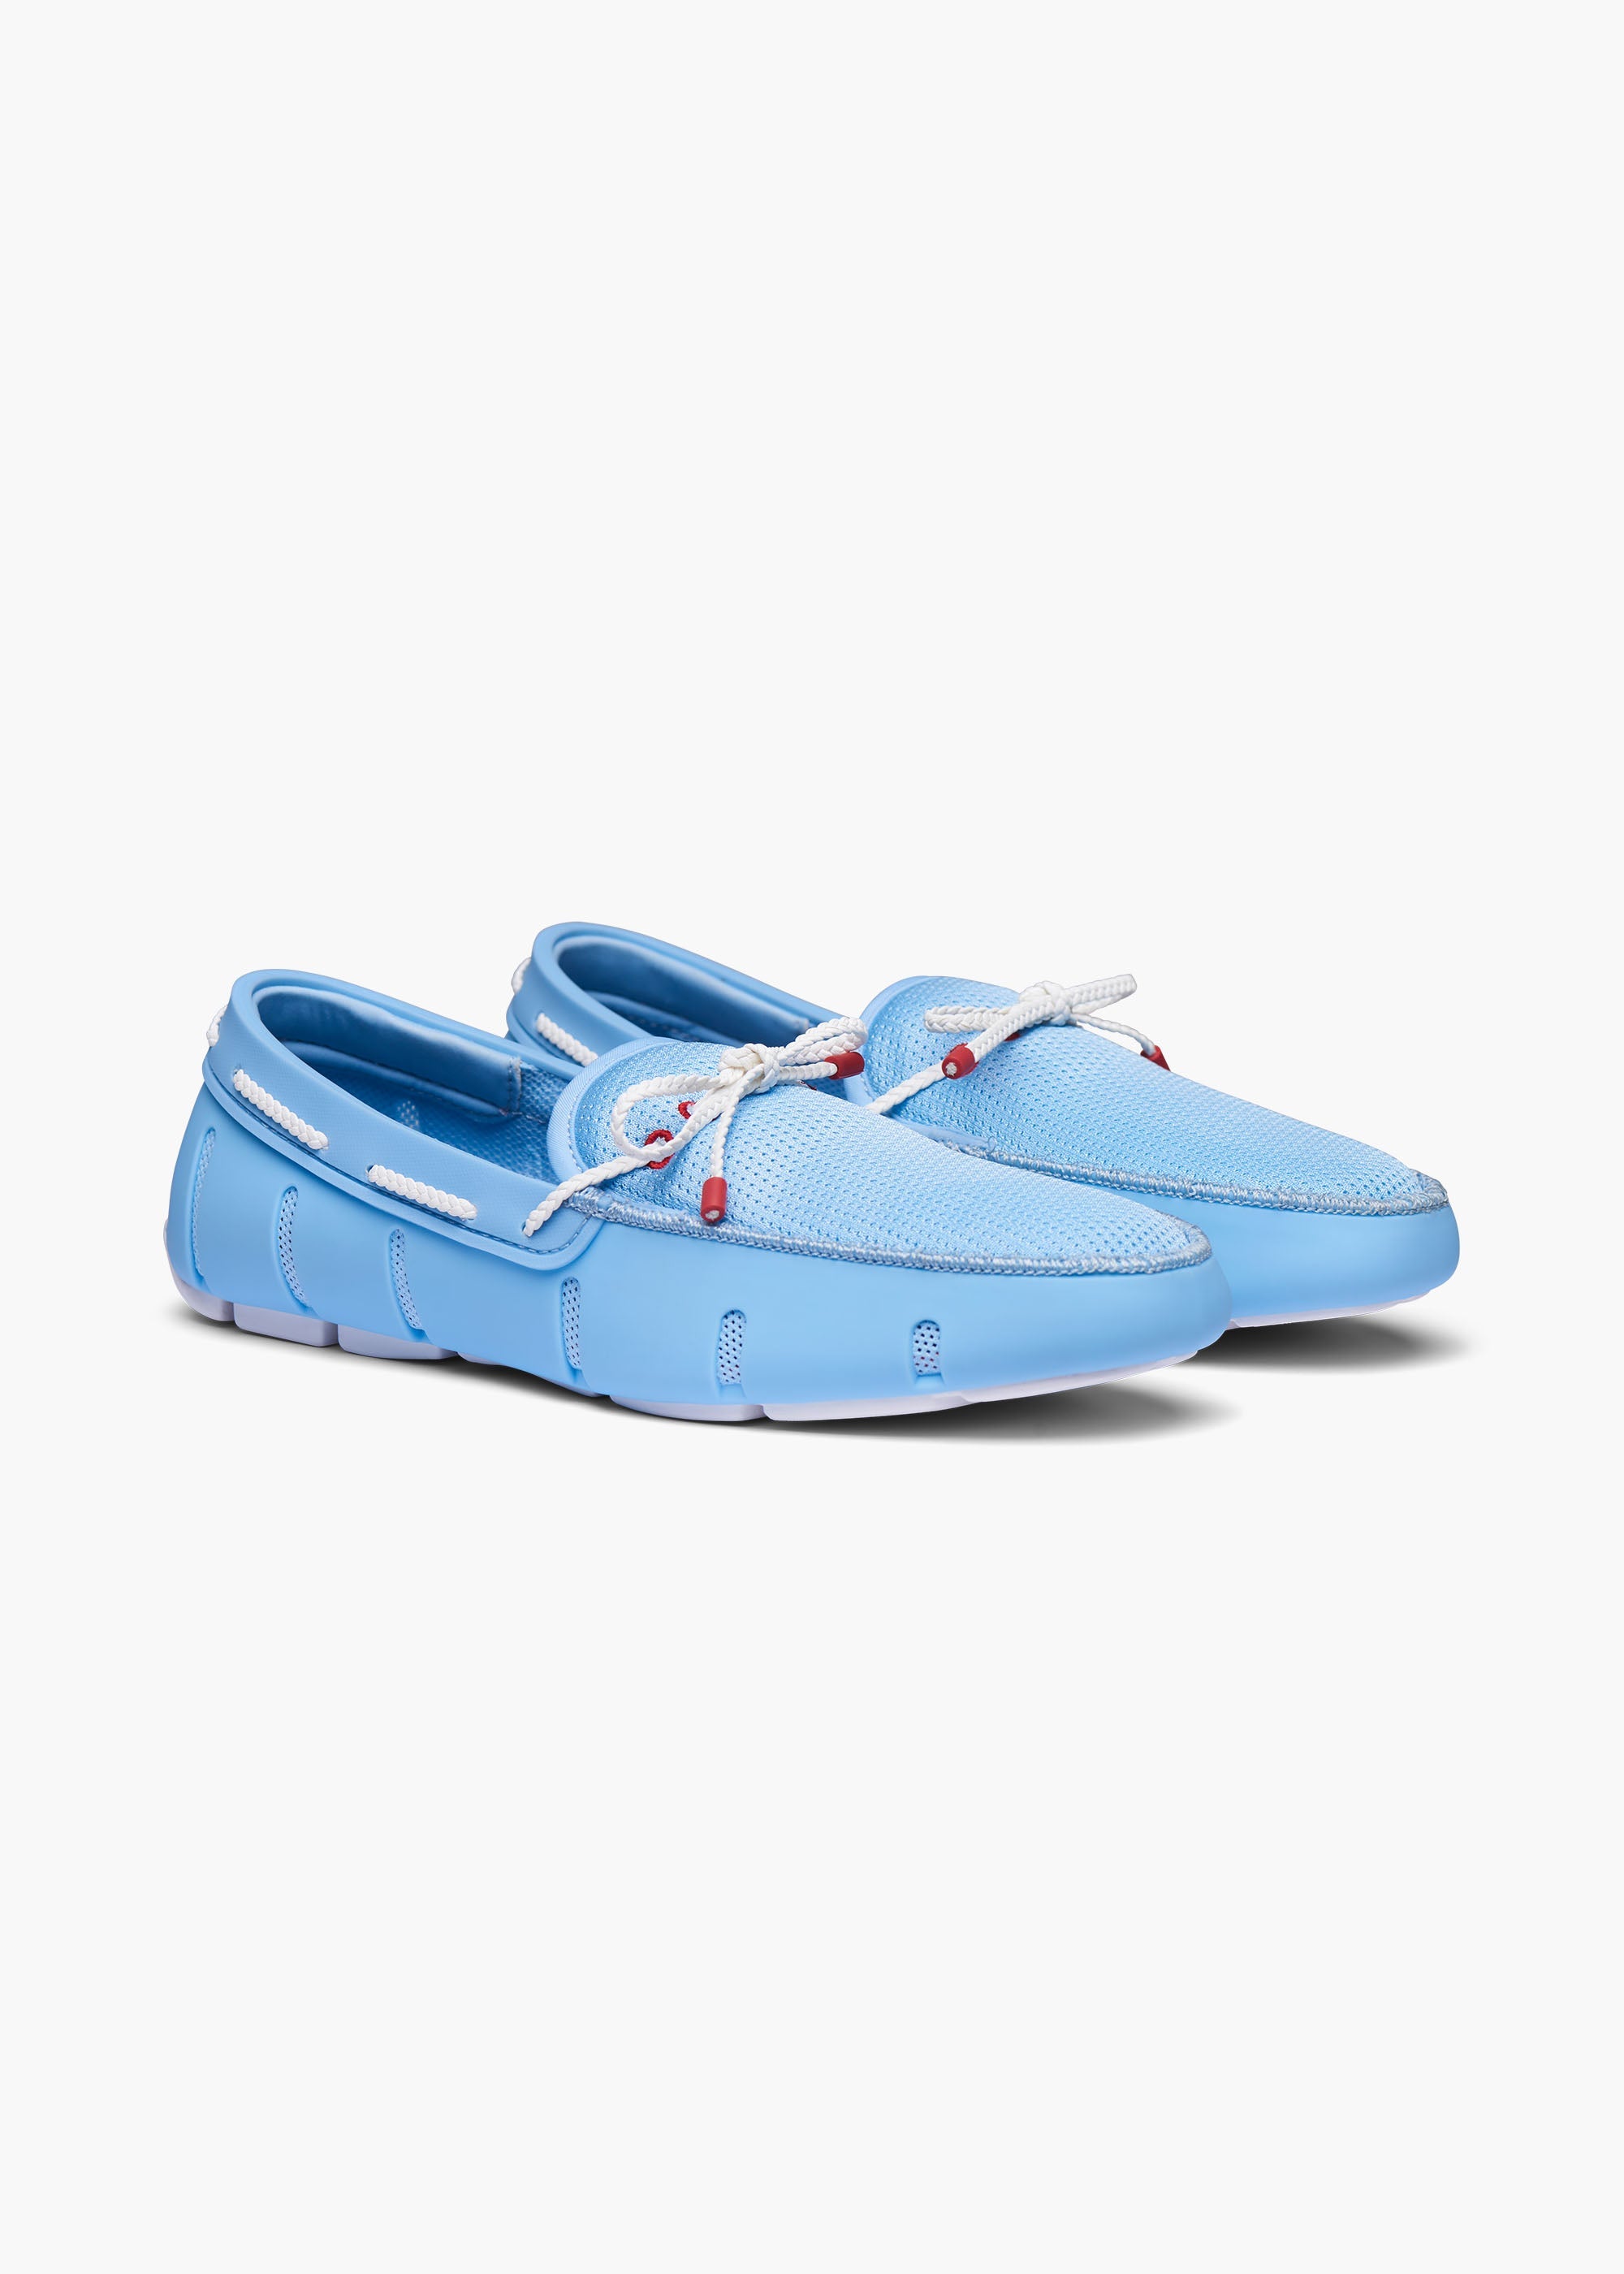 Viva Citron mangel Braided Lace Loafer in Spray Blue for Mens | SWIMS | SWIMS